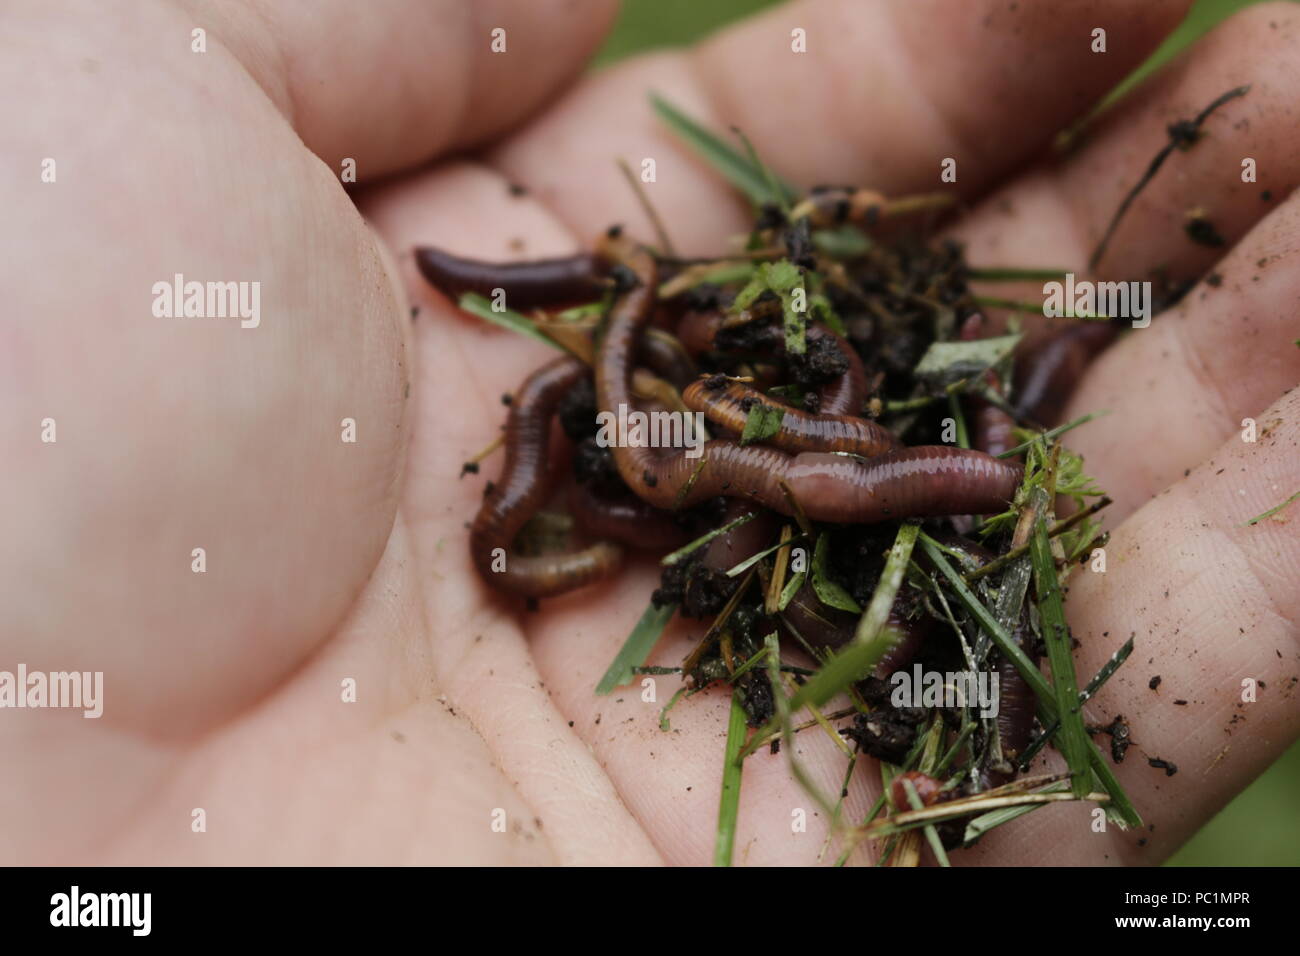 Earth worms known as red wigglers in a mans hand. these worms are used for bait and to compost organic waste. Stock Photo